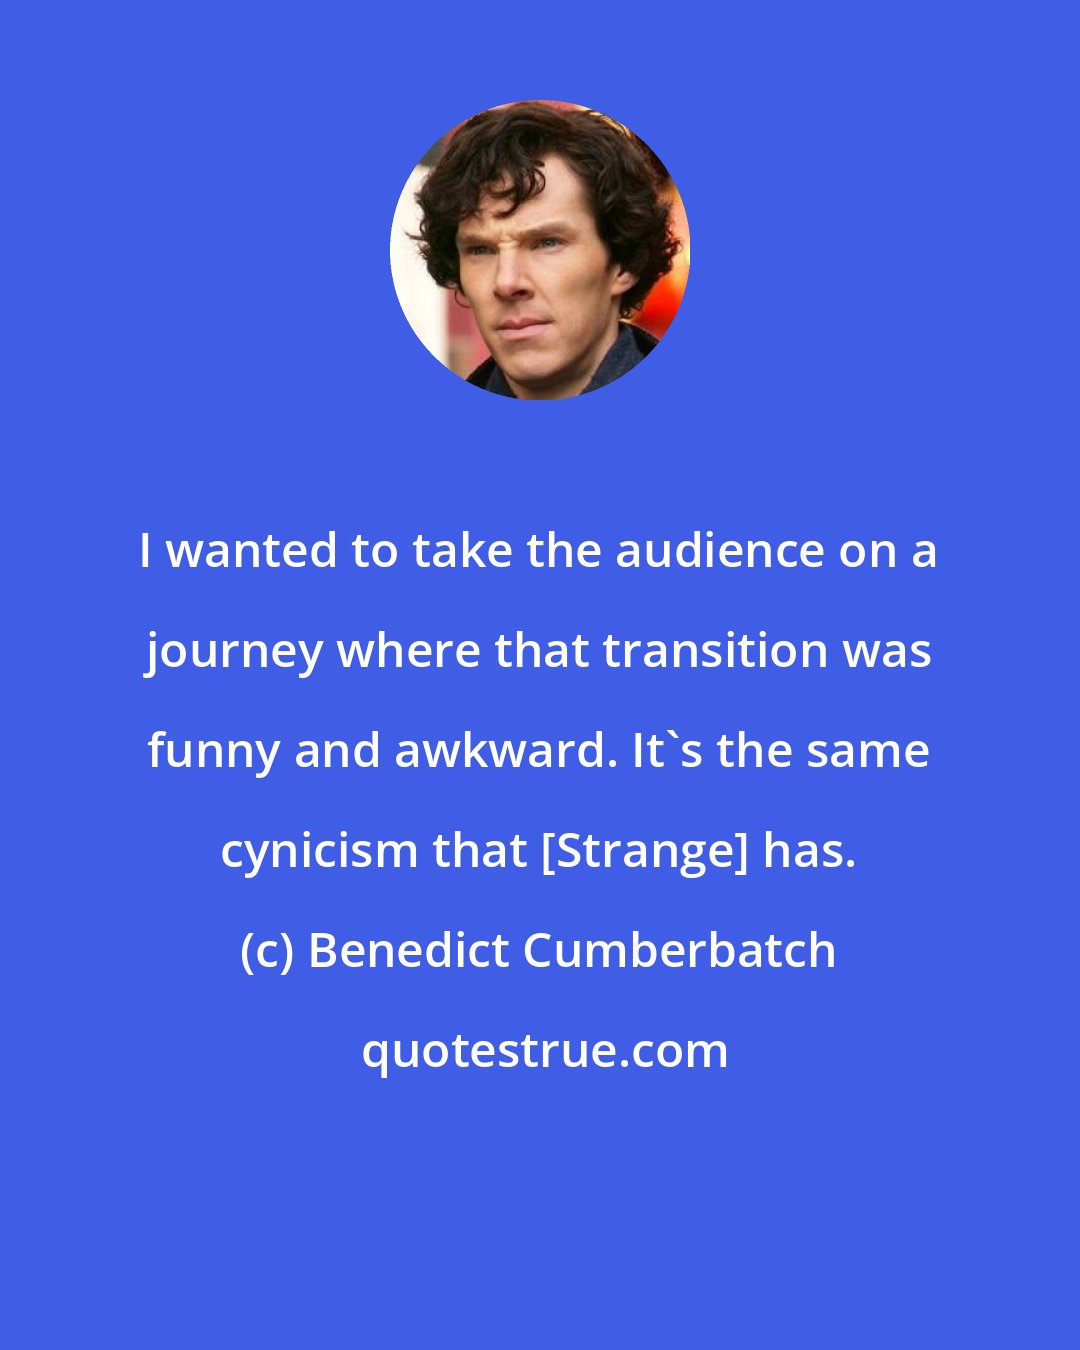 Benedict Cumberbatch: I wanted to take the audience on a journey where that transition was funny and awkward. It's the same cynicism that [Strange] has.